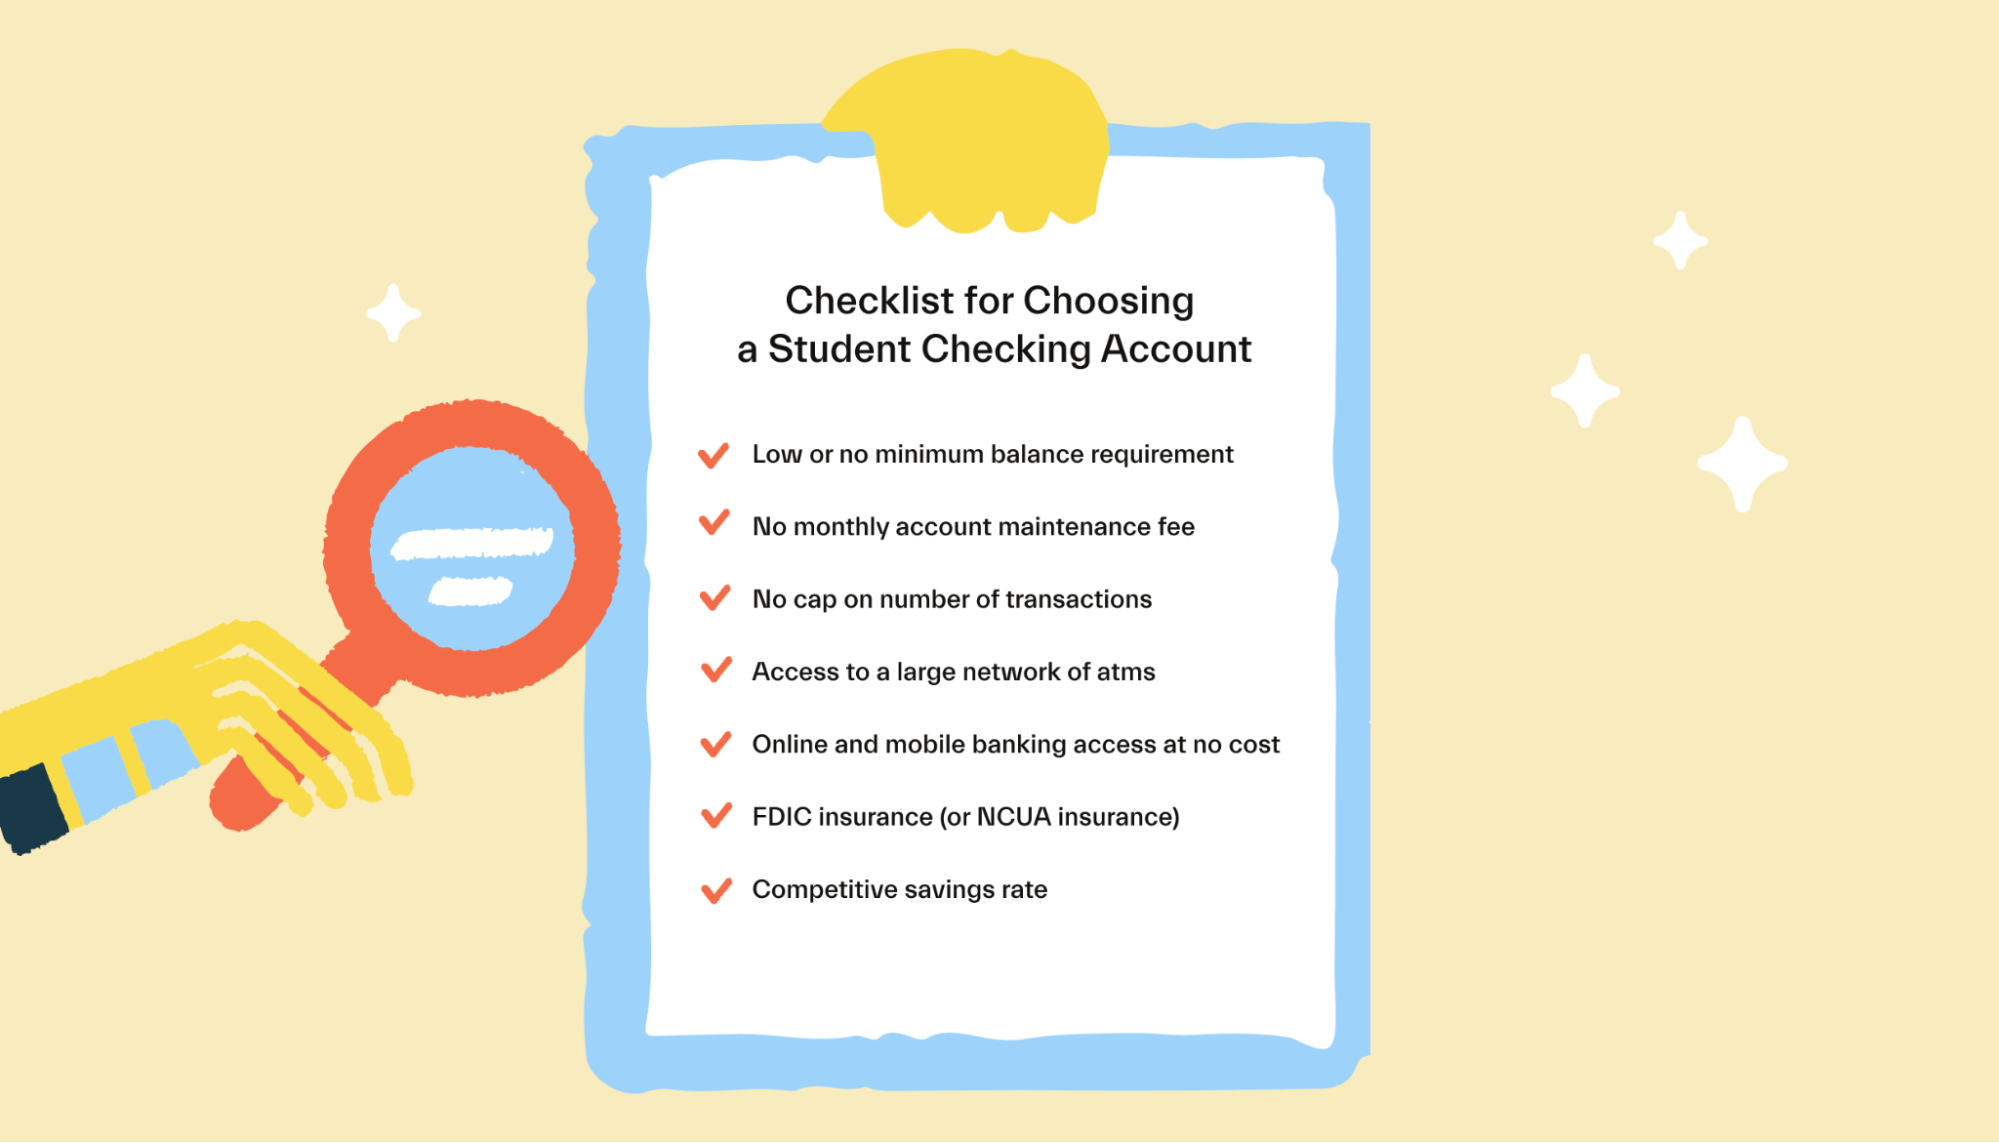 Checklist for Choosing Student Checking Account